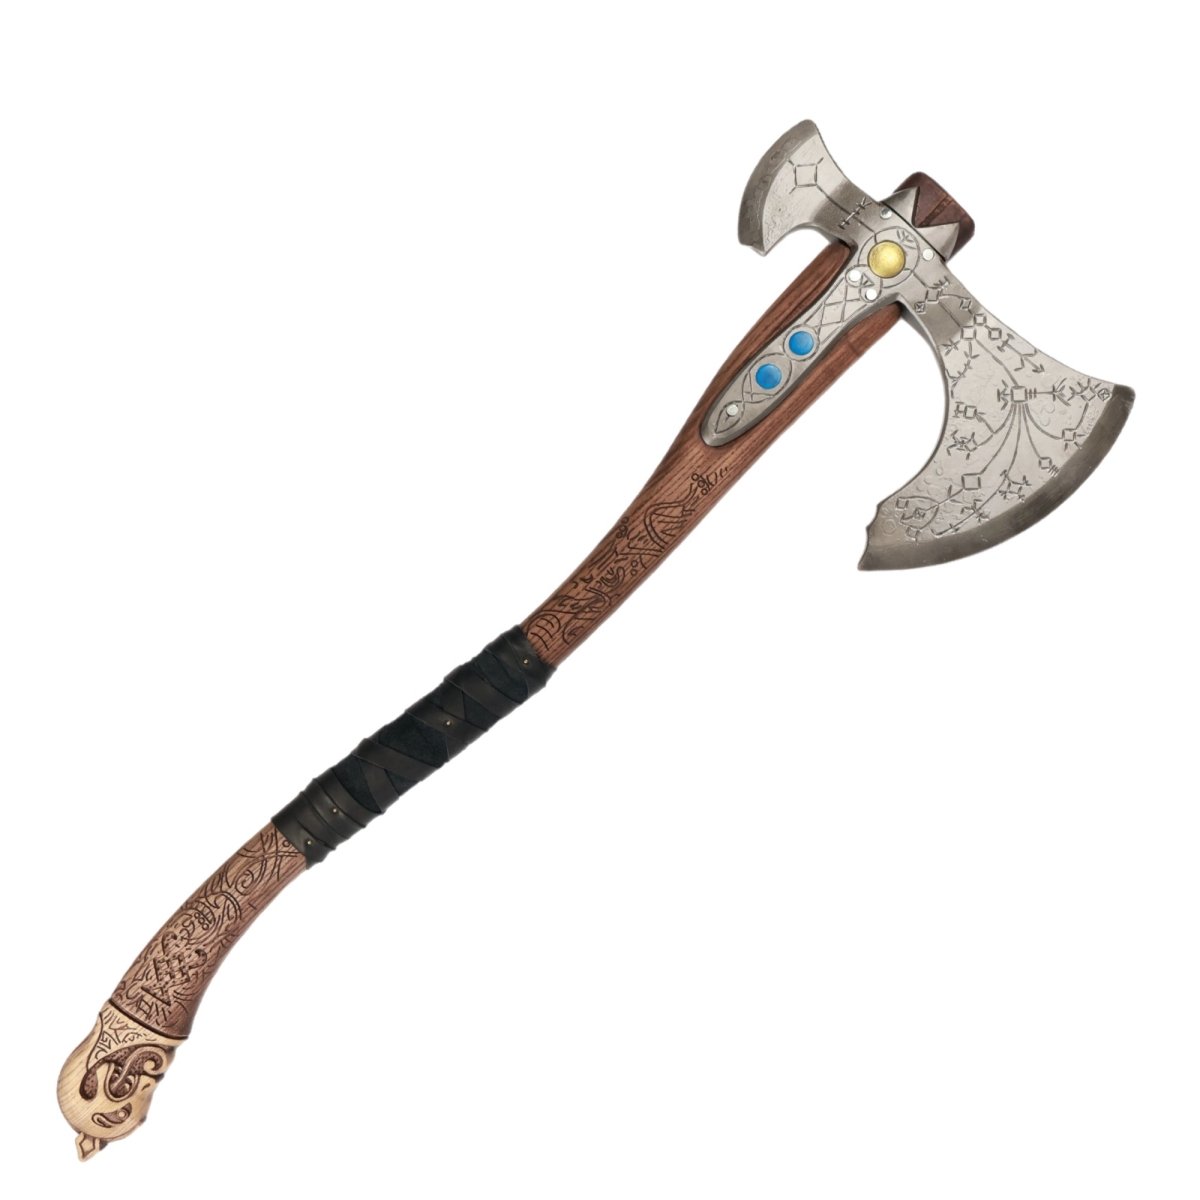 Hand-forged Leviathan axe with hardened head and carved handle "Tyr" from AncientSmithy